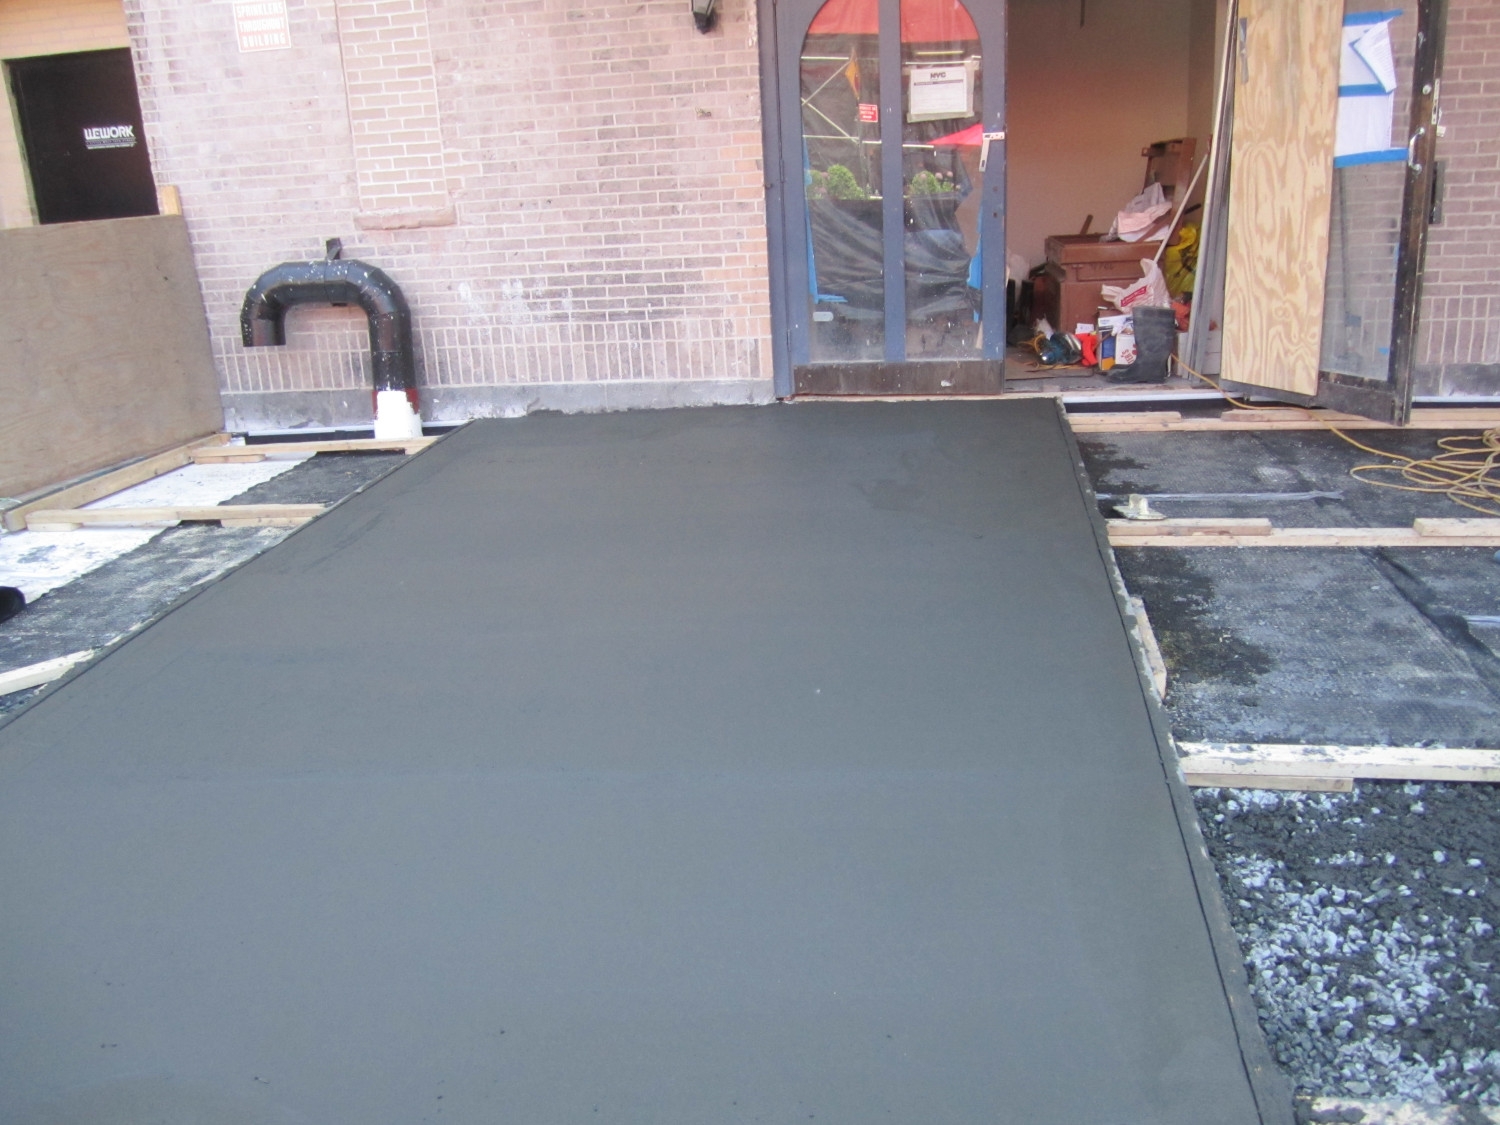 Work-in-progress image of a large 10x25 foot concrete sidewalk replacement in New York City, showcasing the curing concrete, expansion joints, and form work expertly handled by Jepol Construction.